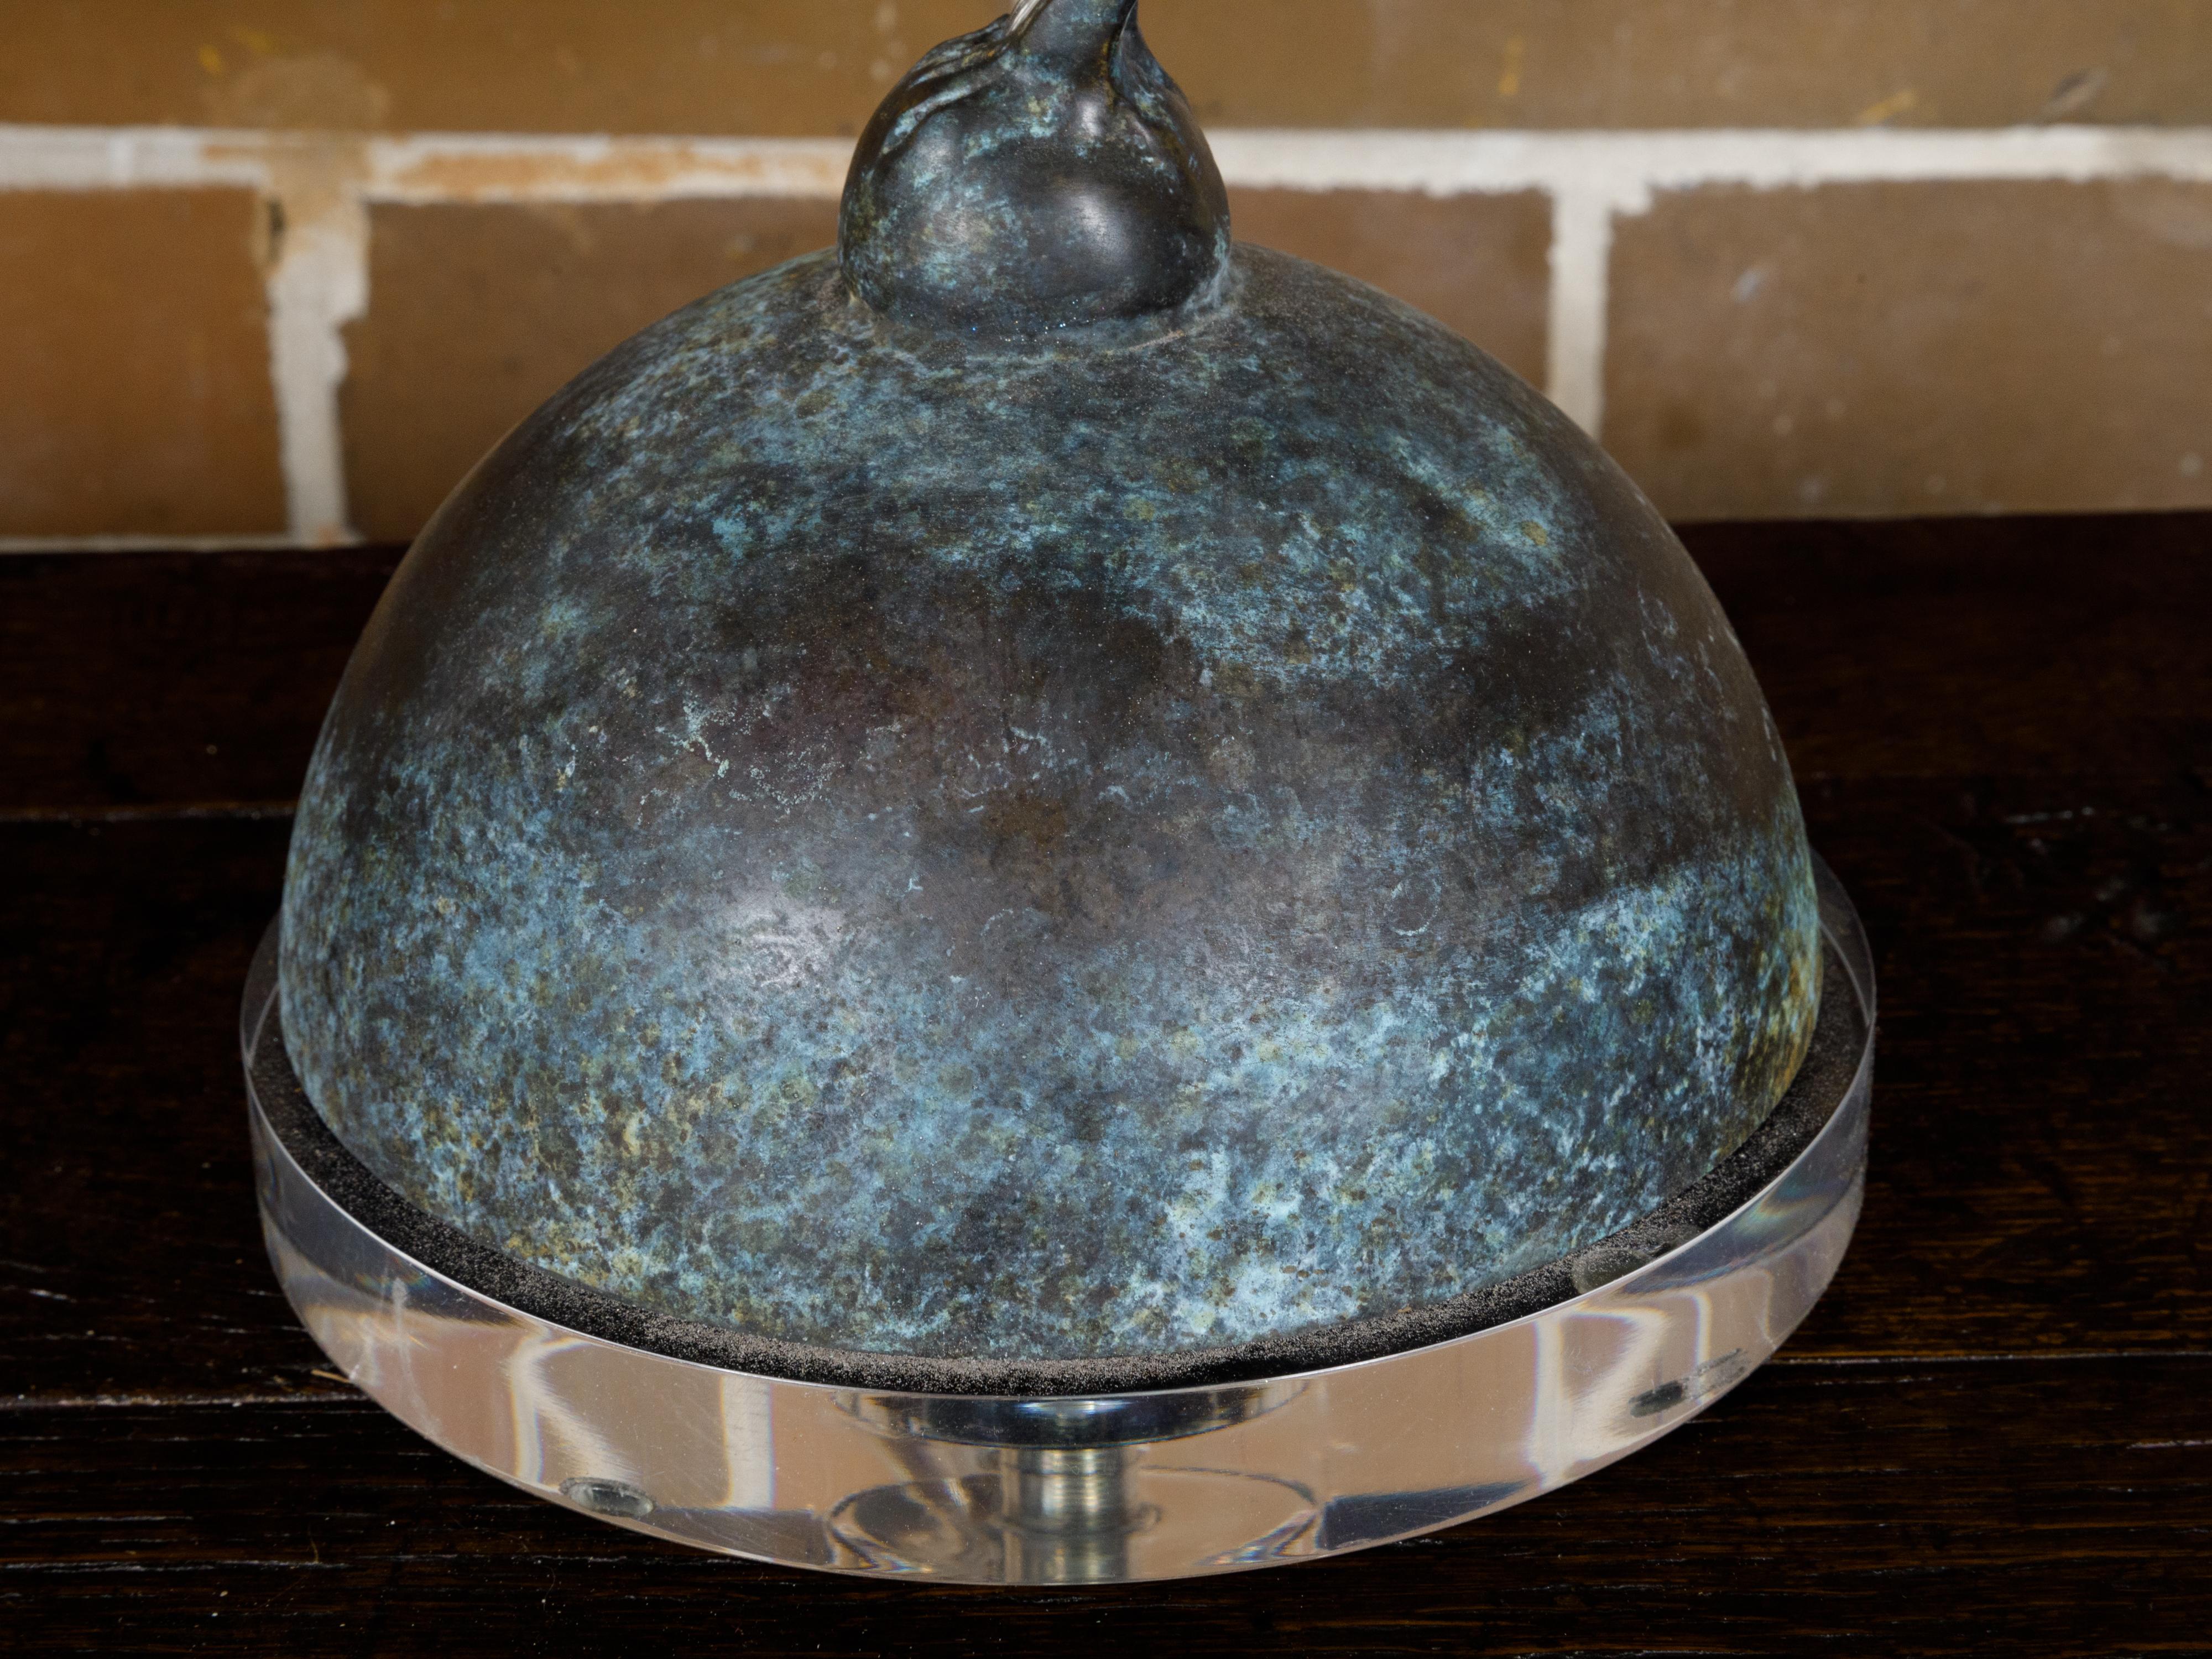 Pair of French Midcentury Bronze Birds Table Lamps with Verdigris Patina, Wired 2